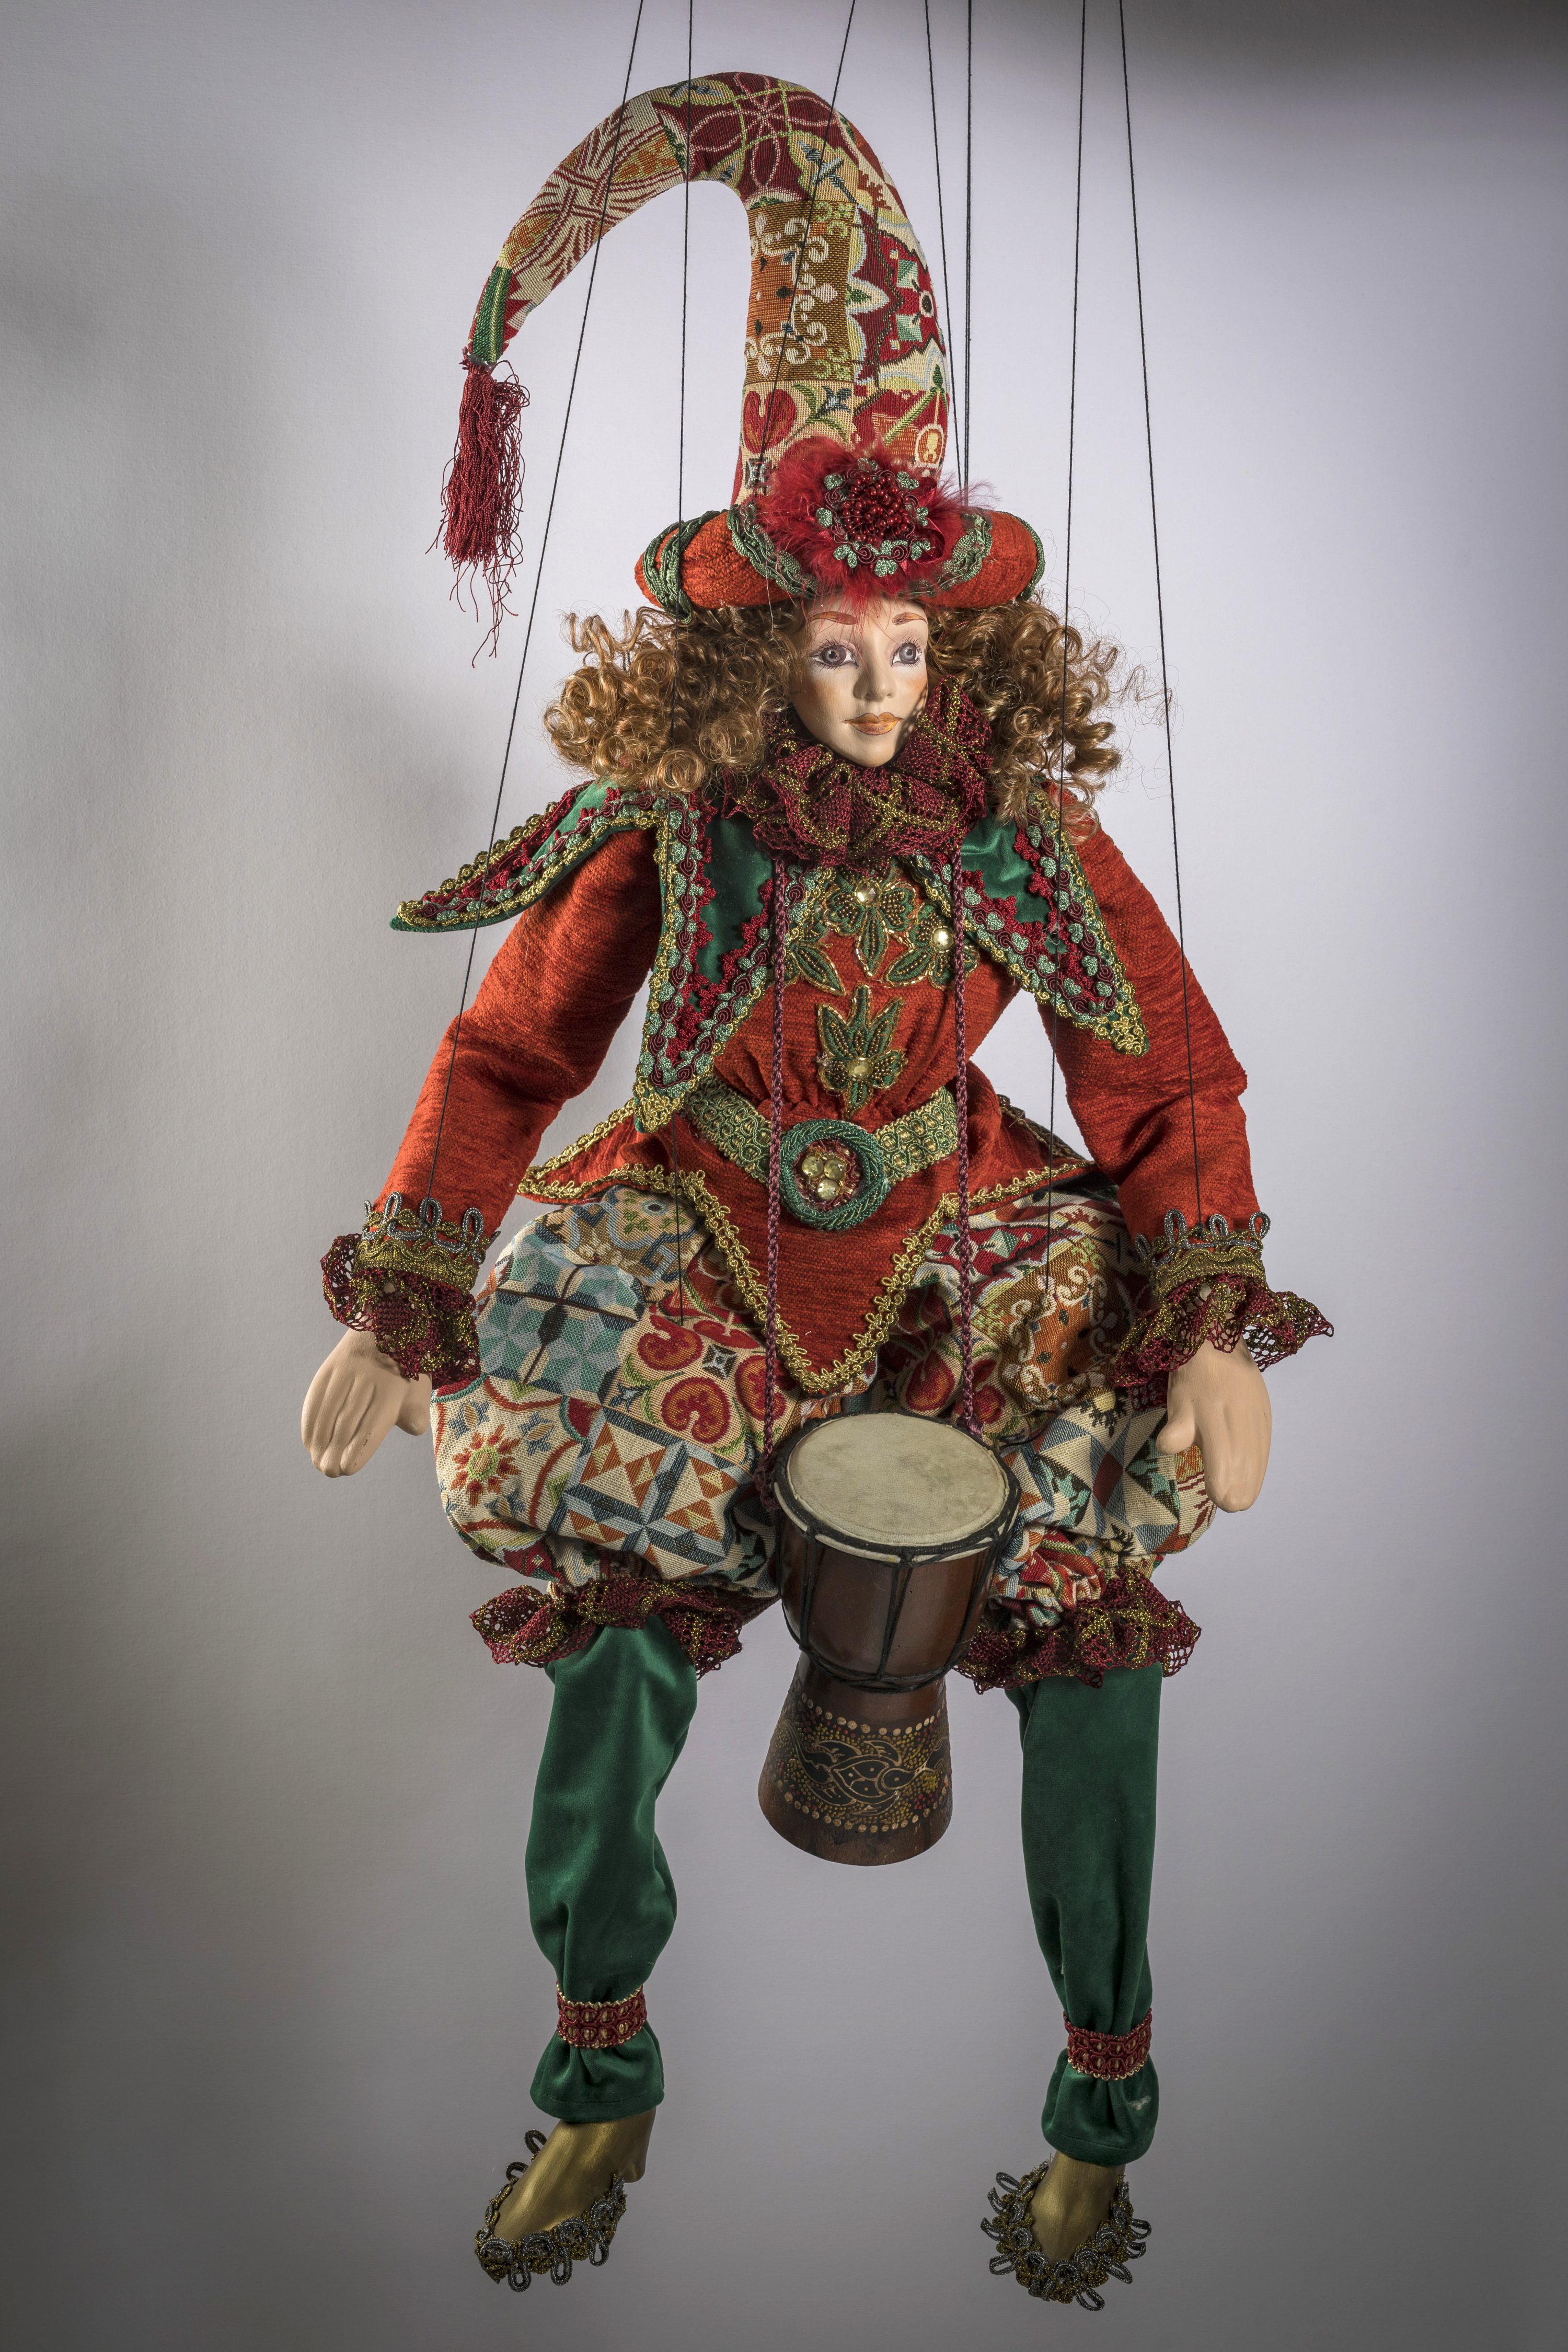 The Drummer is handmade marionette by Vasiliki Savvani She uses different fabrics every detail is hand-sewn, face, hands and feets made by ceramic. His face is hand painted by acrilyc paints.